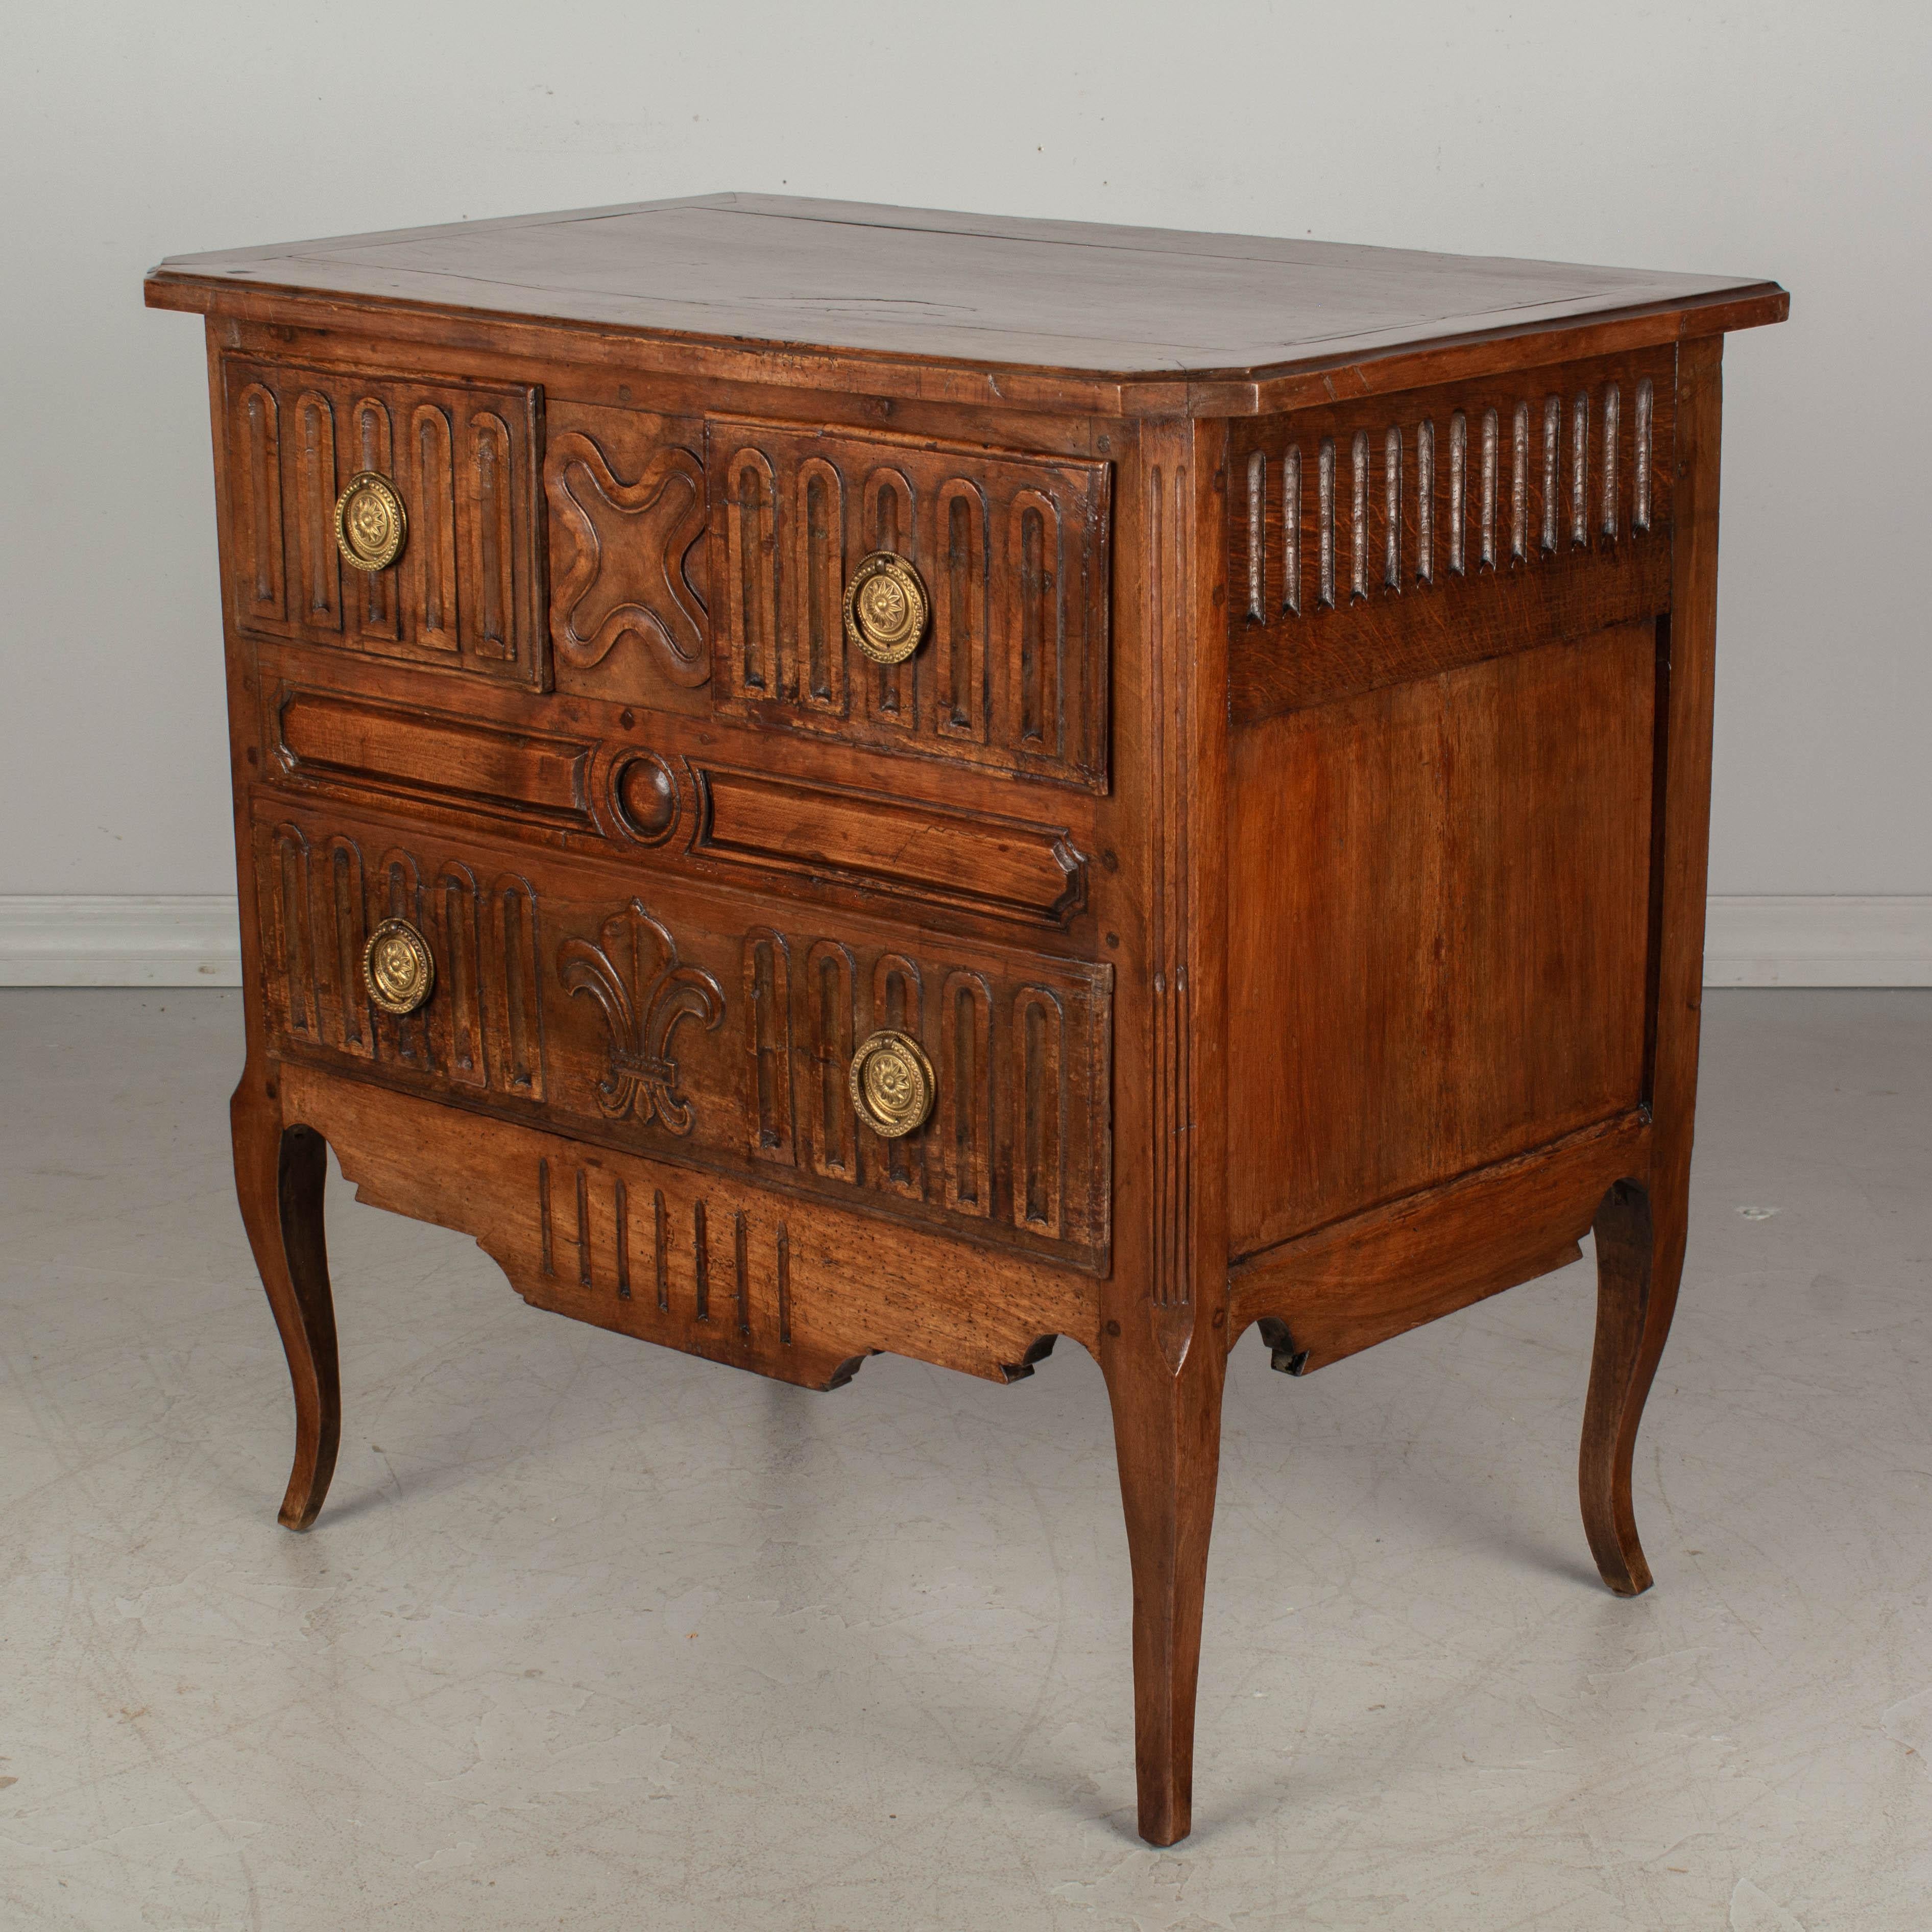 A Country French commode, or chest of drawers, made of solid walnut, cherry and fruitwood. Three dovetailed drawers with brass ring pulls. Hand carved decoration including a large Fleur de Lis on the bottom drawer. Beautiful quality to the wood with